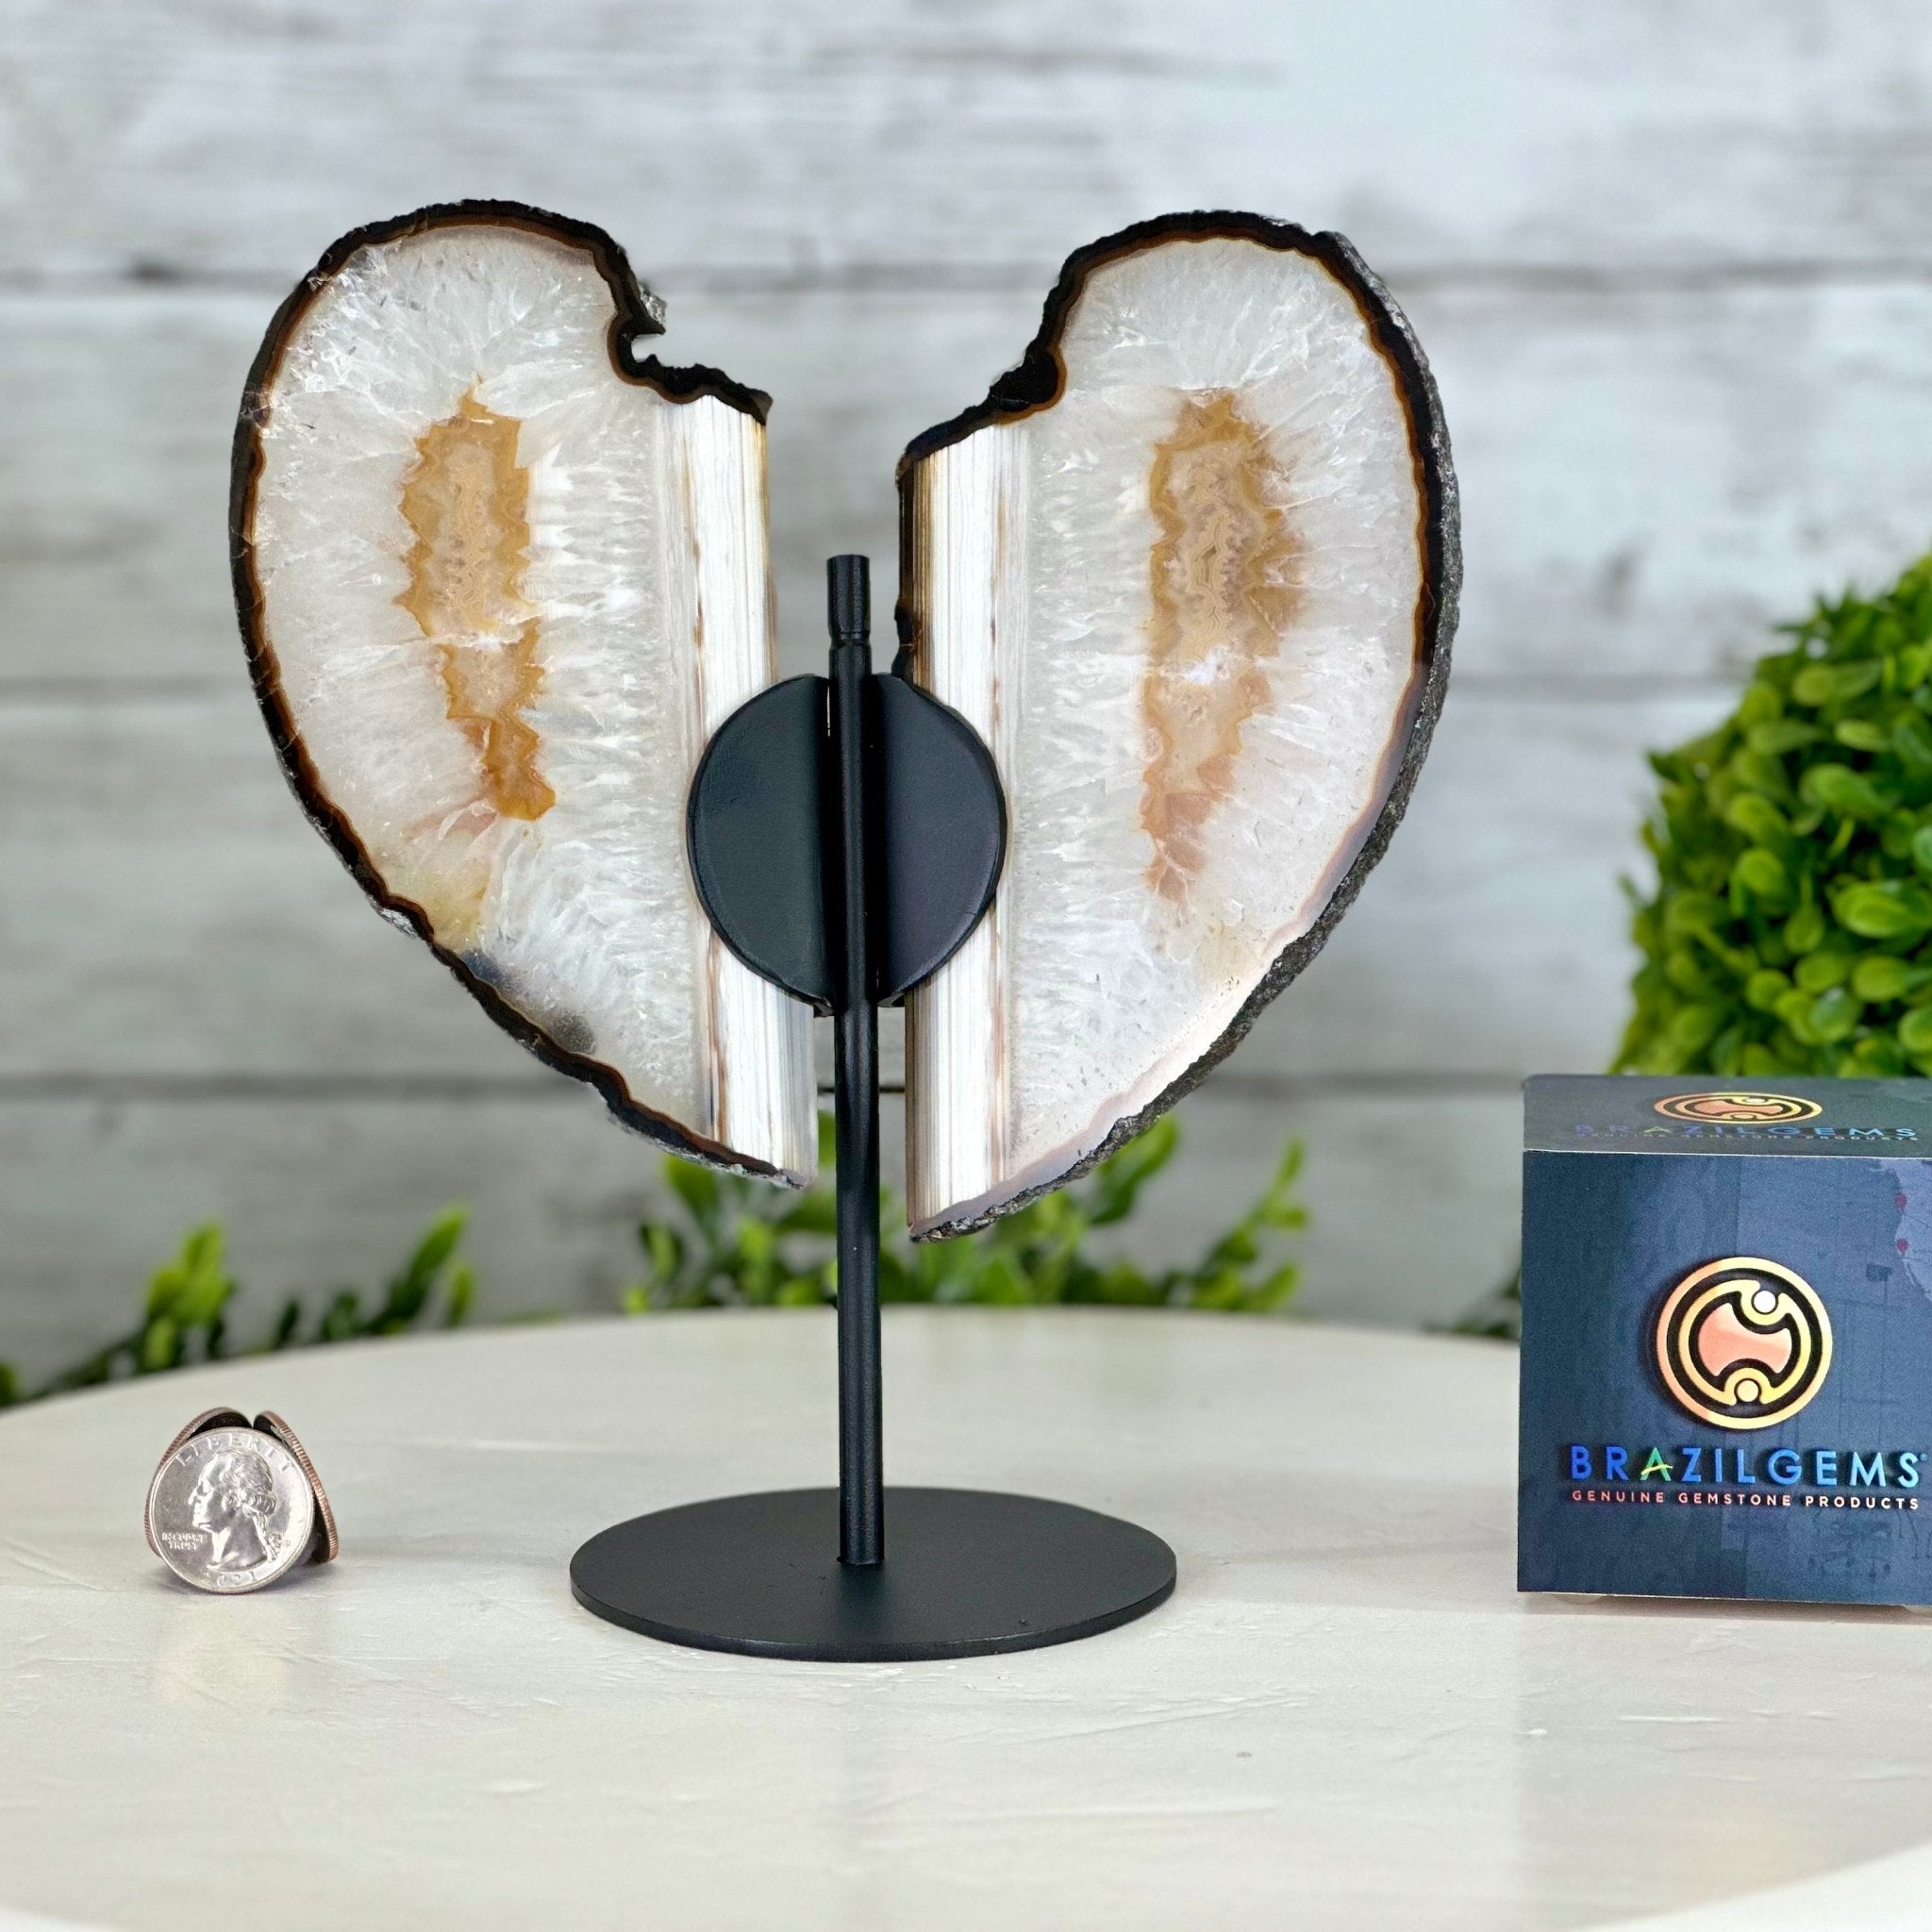 Natural Brazilian Agate "Butterfly Wings", 8" Tall #5050NA-135 - Brazil GemsBrazil GemsNatural Brazilian Agate "Butterfly Wings", 8" Tall #5050NA-135Agate Butterfly Wings5050NA-135